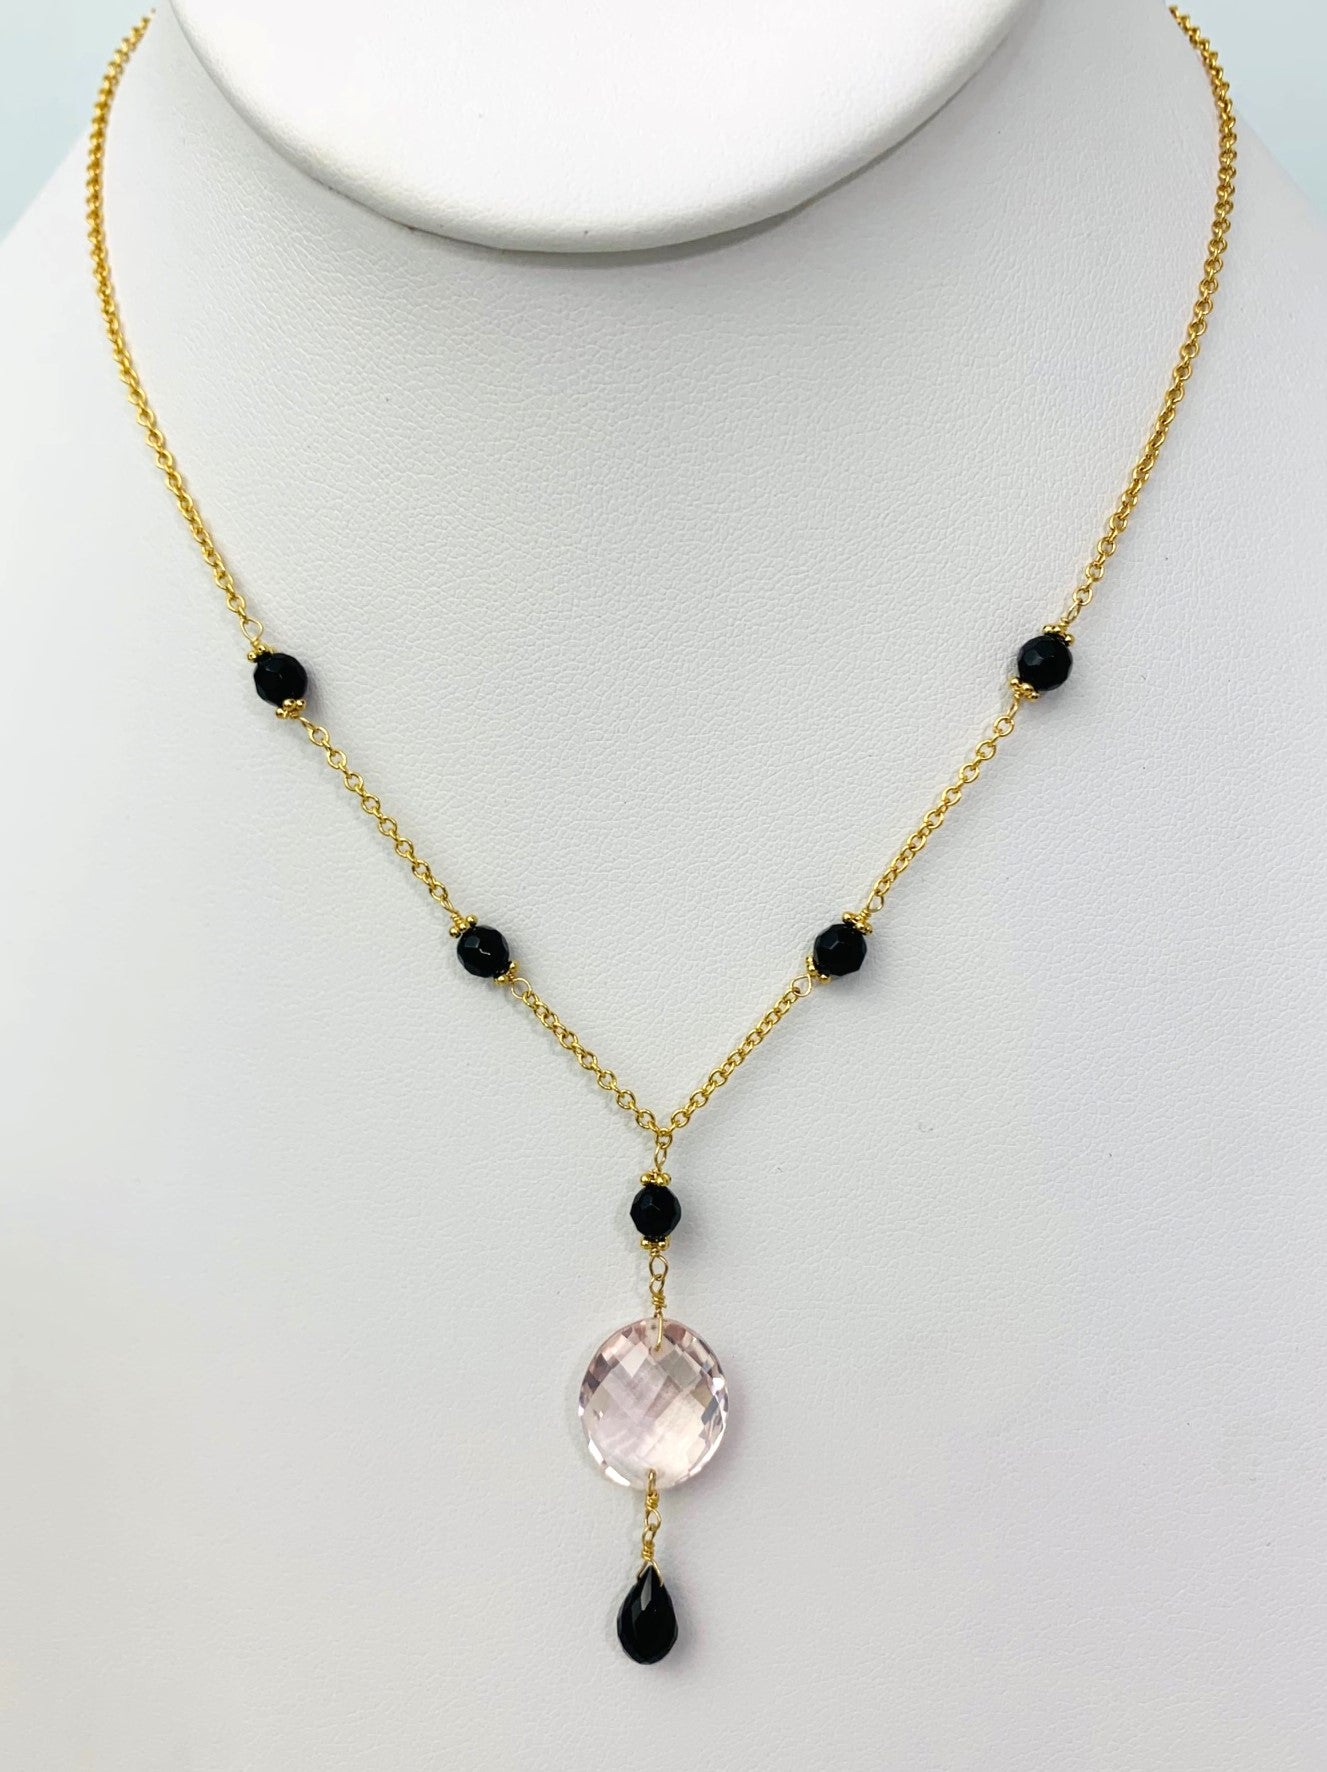 15-16" Rose Quartz And Onyx Station Necklace With Oval Checkerboard And Briolette Lariat Drop in 14KY - NCK-356-TNCDRPGM14Y-RQOX-16